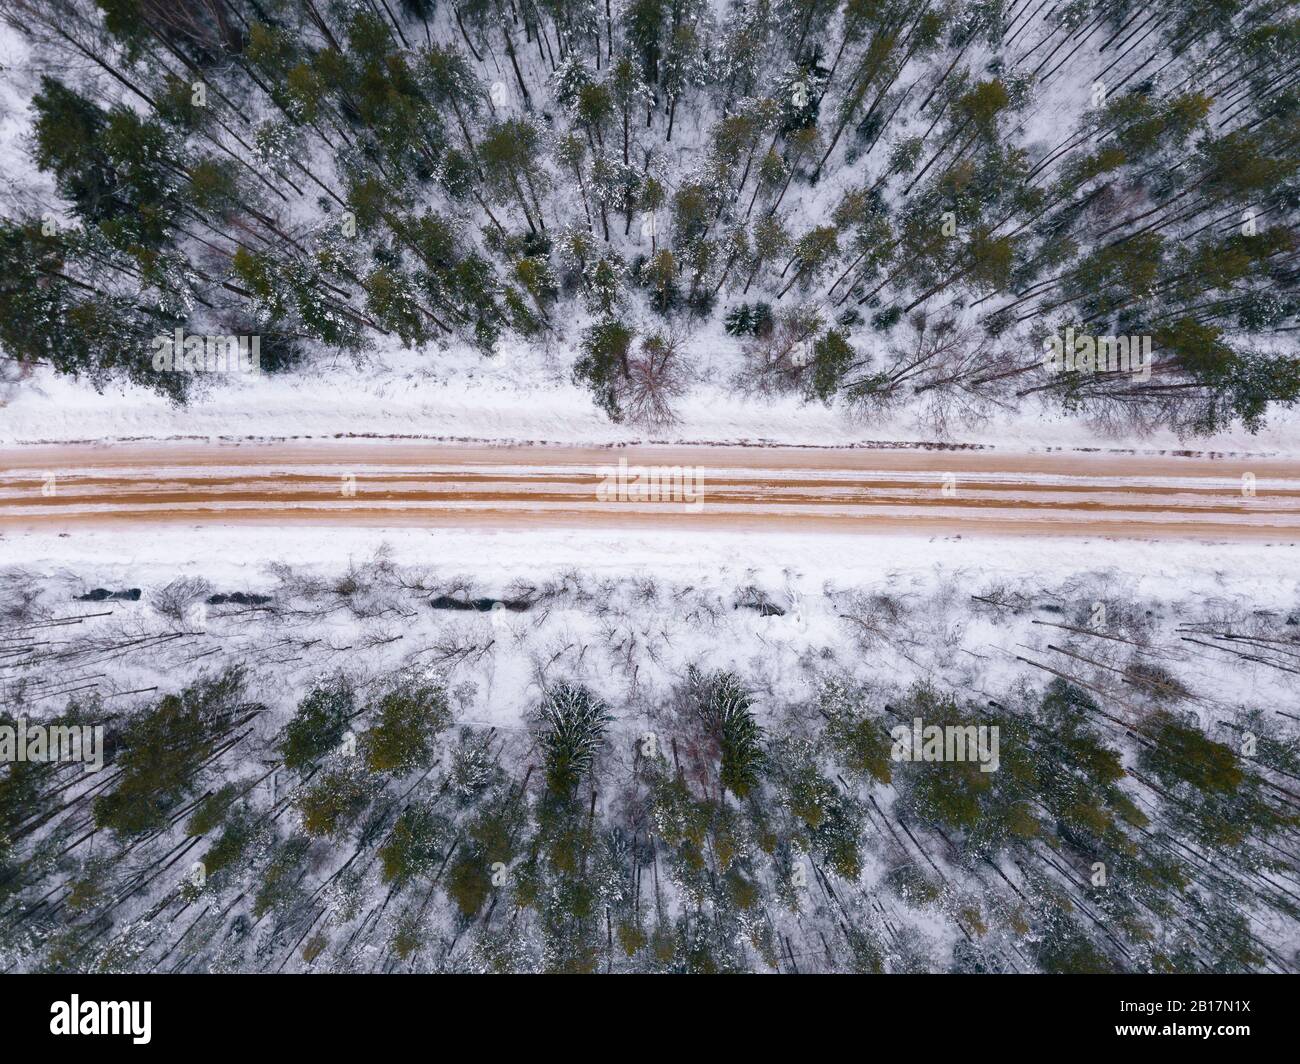 Russia, Leningrad region, Aerial view of road crossing forest in Winter Stock Photo